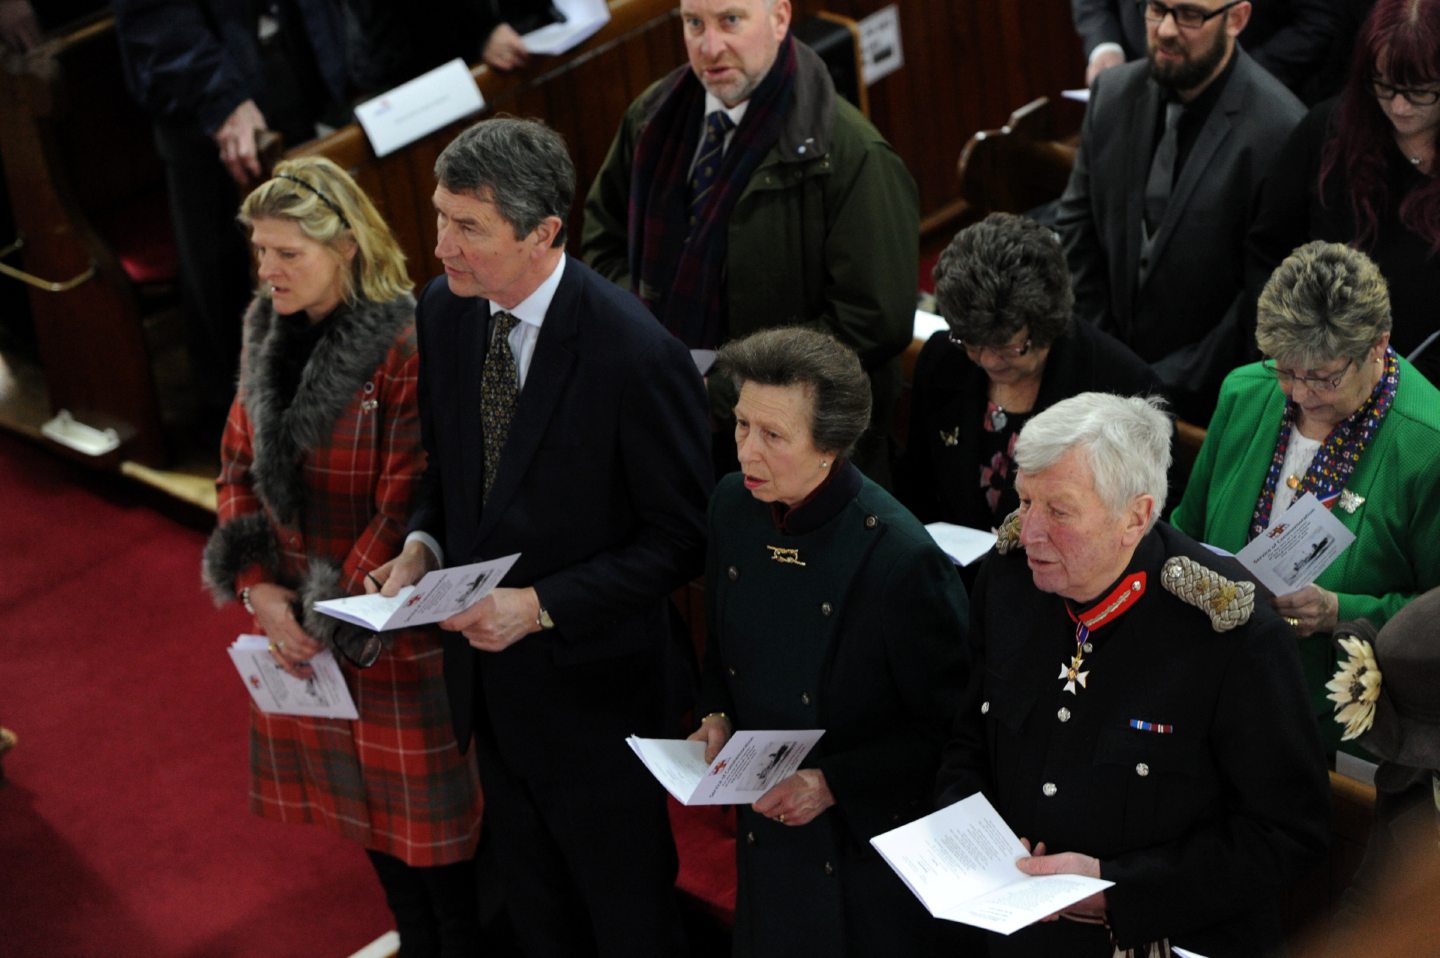 The Princess Royal and Vice Admiral Sir Timothy Laurence (second left) attended the service of remembrance at Fraserburgh Old Parish Church.